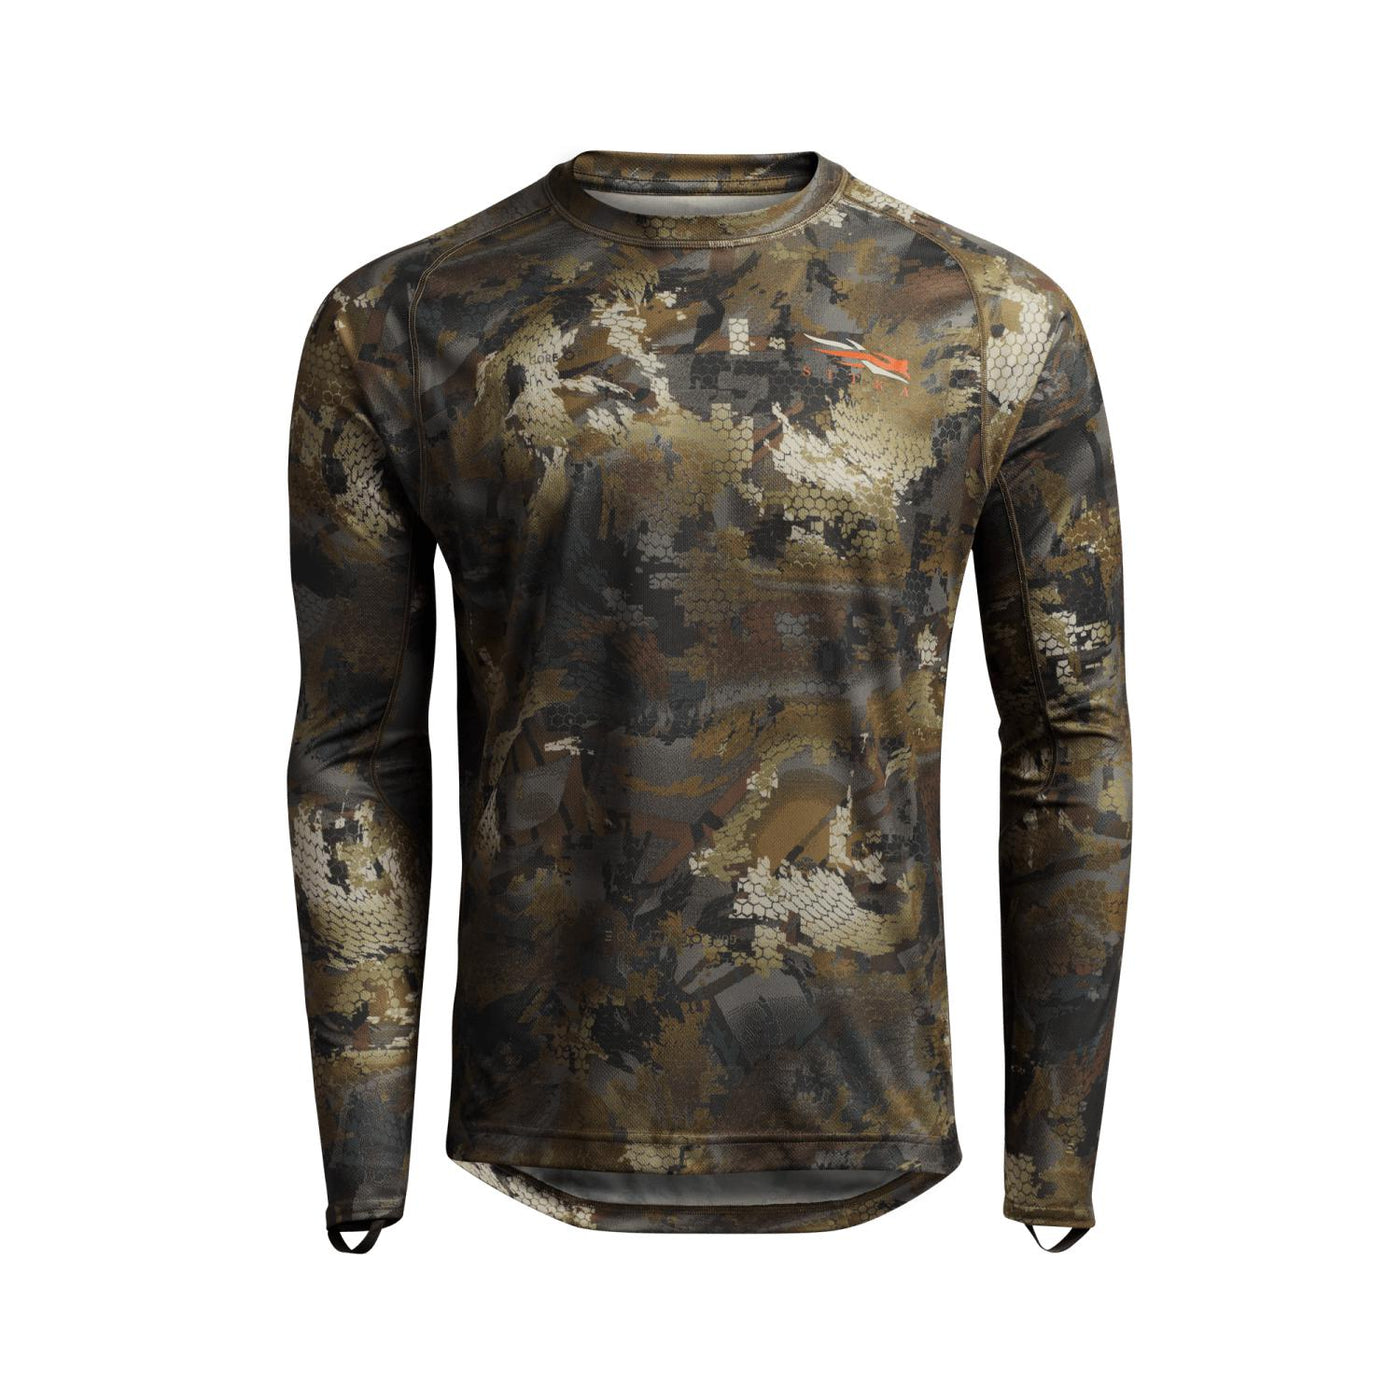 Sitka Core Lightweight Long Sleeve Crew-Men's Clothing-Timber-M-Kevin's Fine Outdoor Gear & Apparel